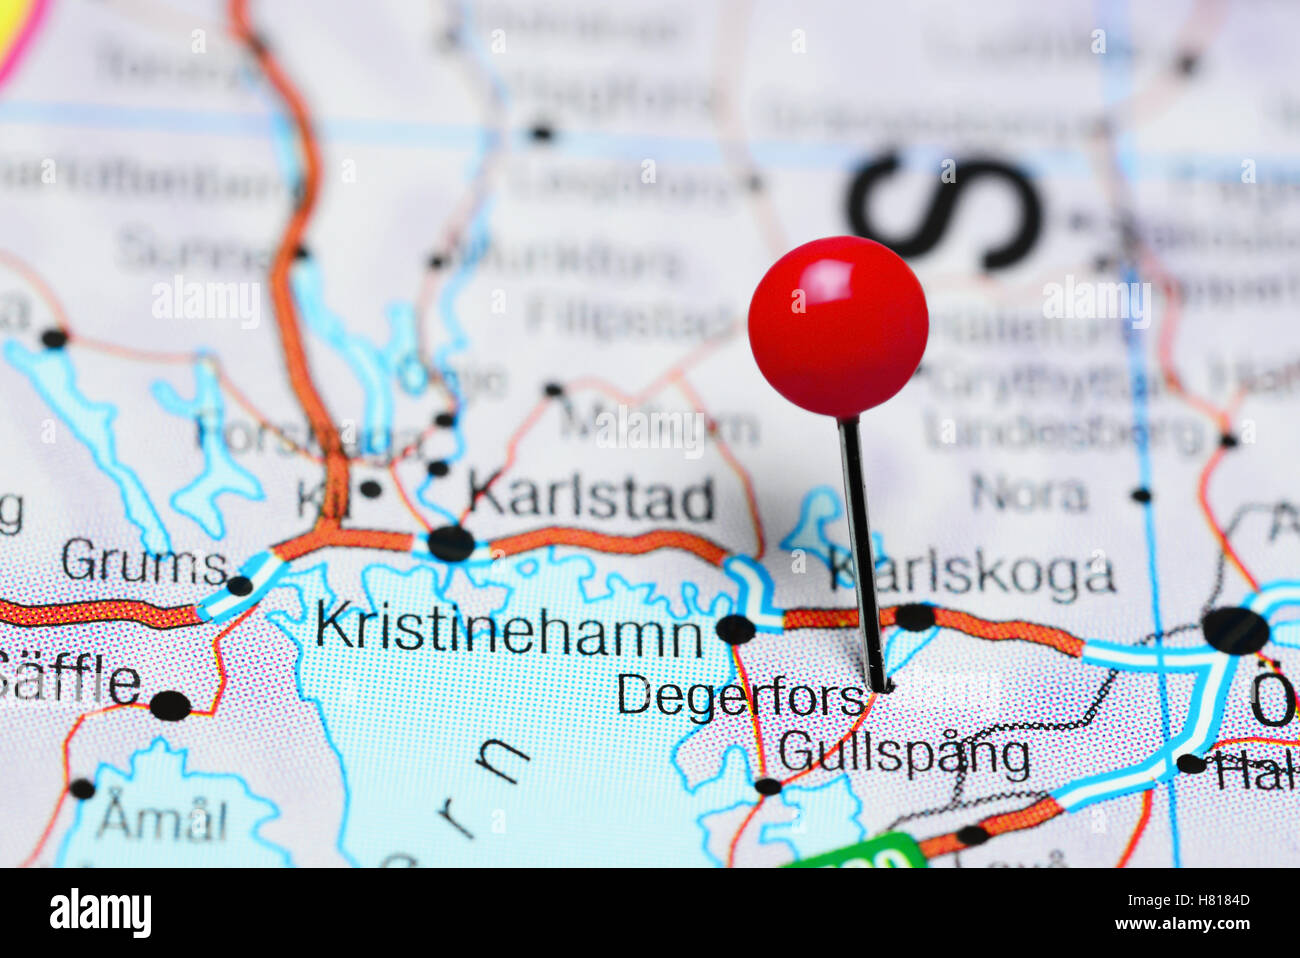 Degerfors pinned on a map of Sweden Stock Photo